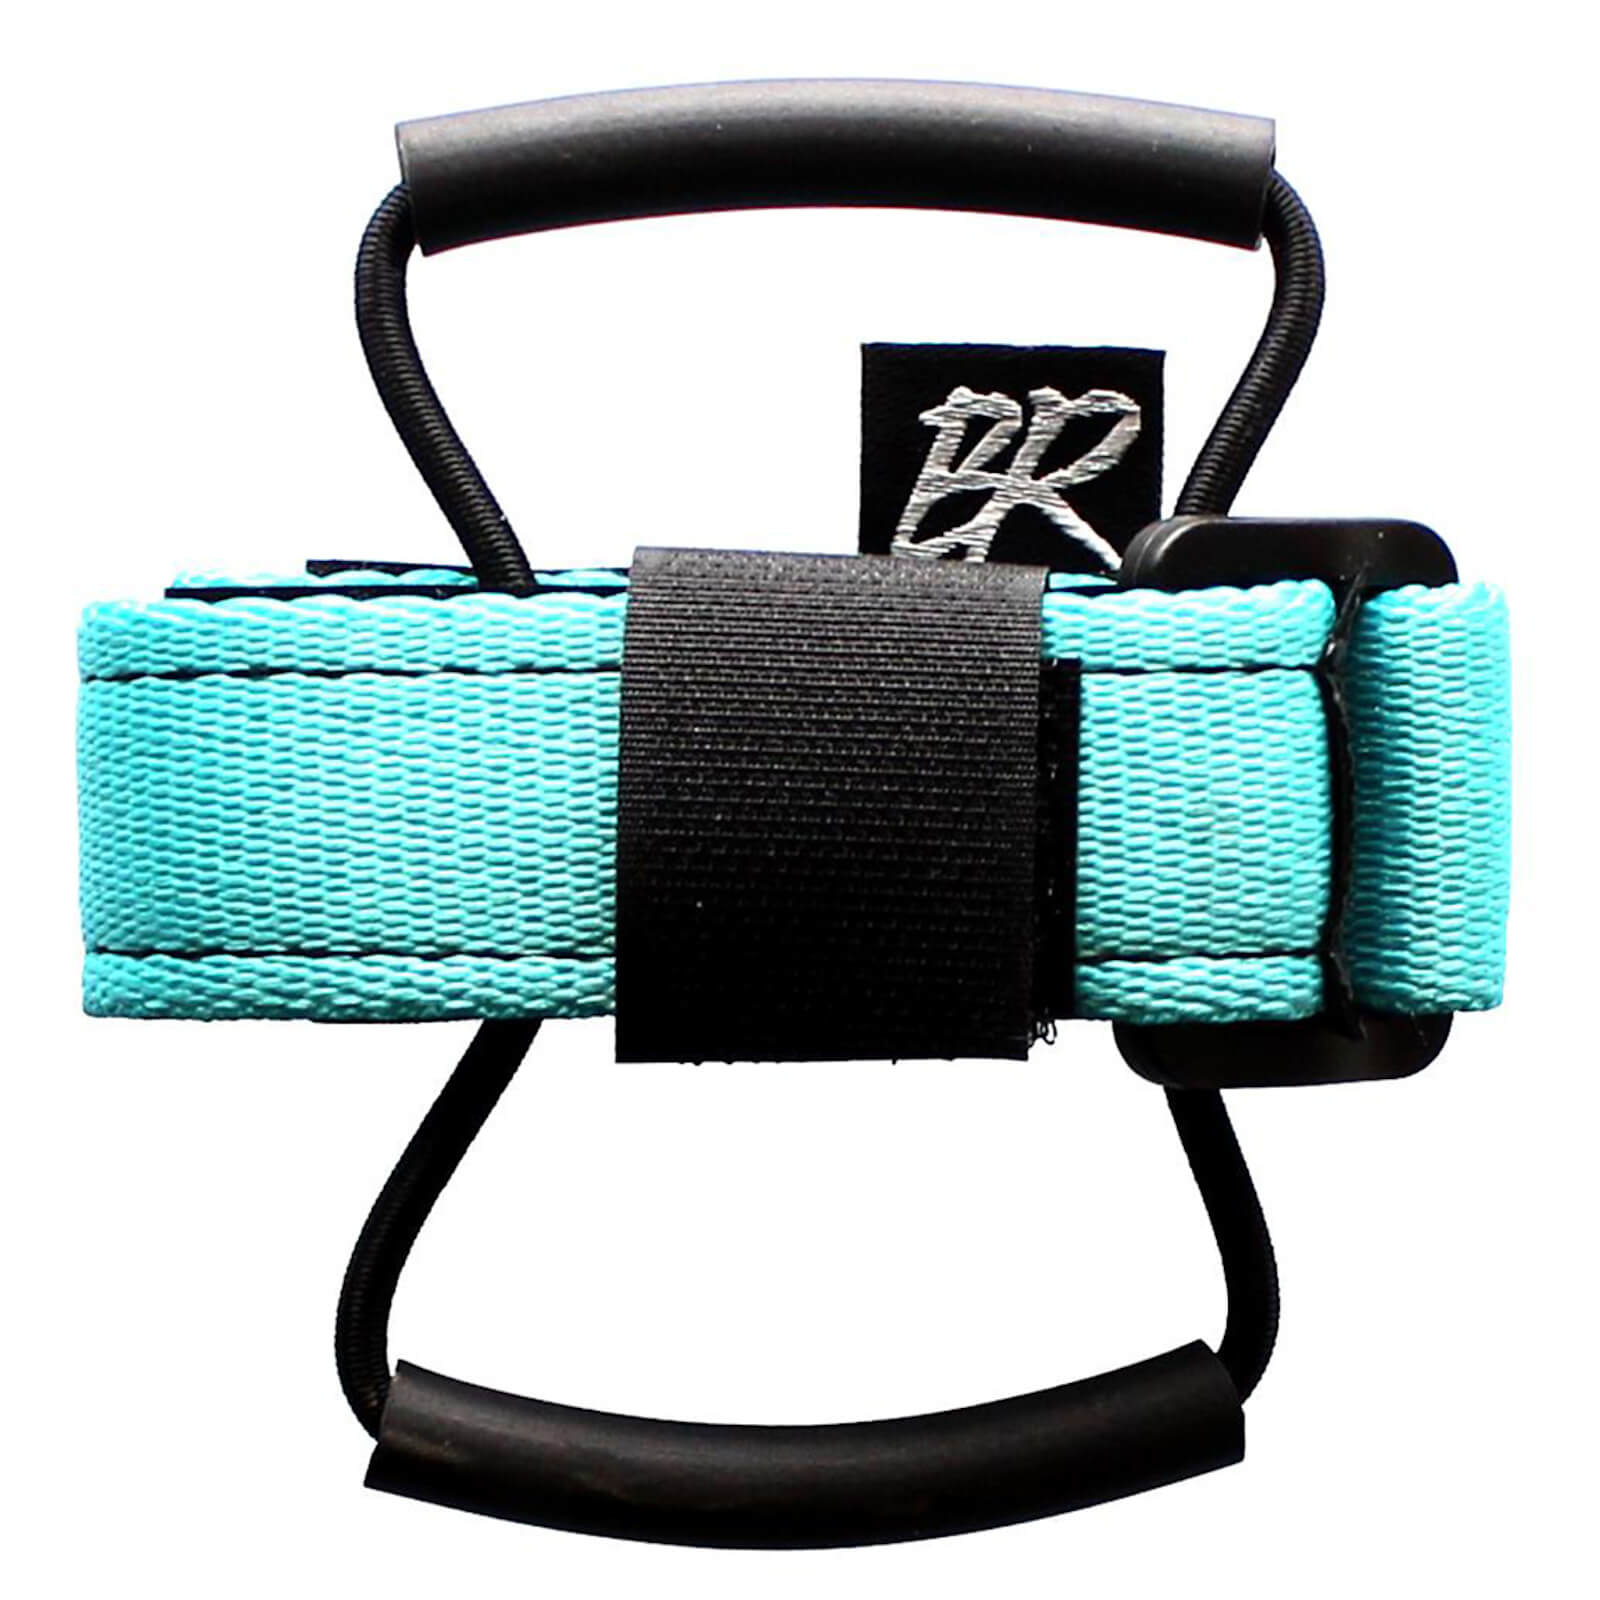 BackCountry Camrat Strap - Turquoise